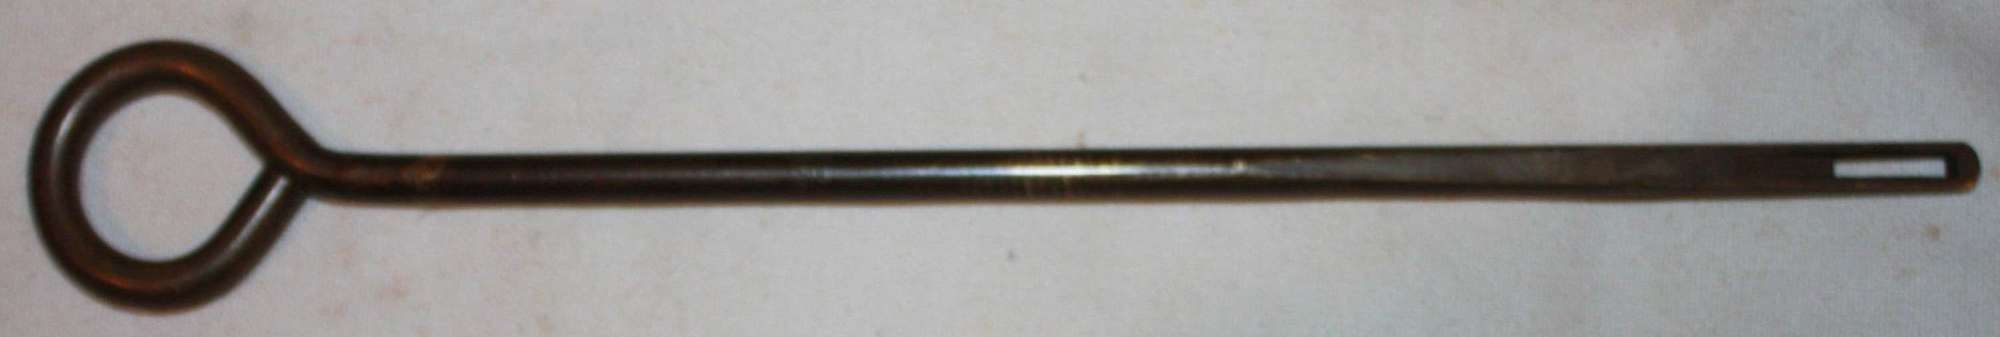 A GOOD MARKED PISTOL CLEANING ROD MADE BY PARKER AND HALE